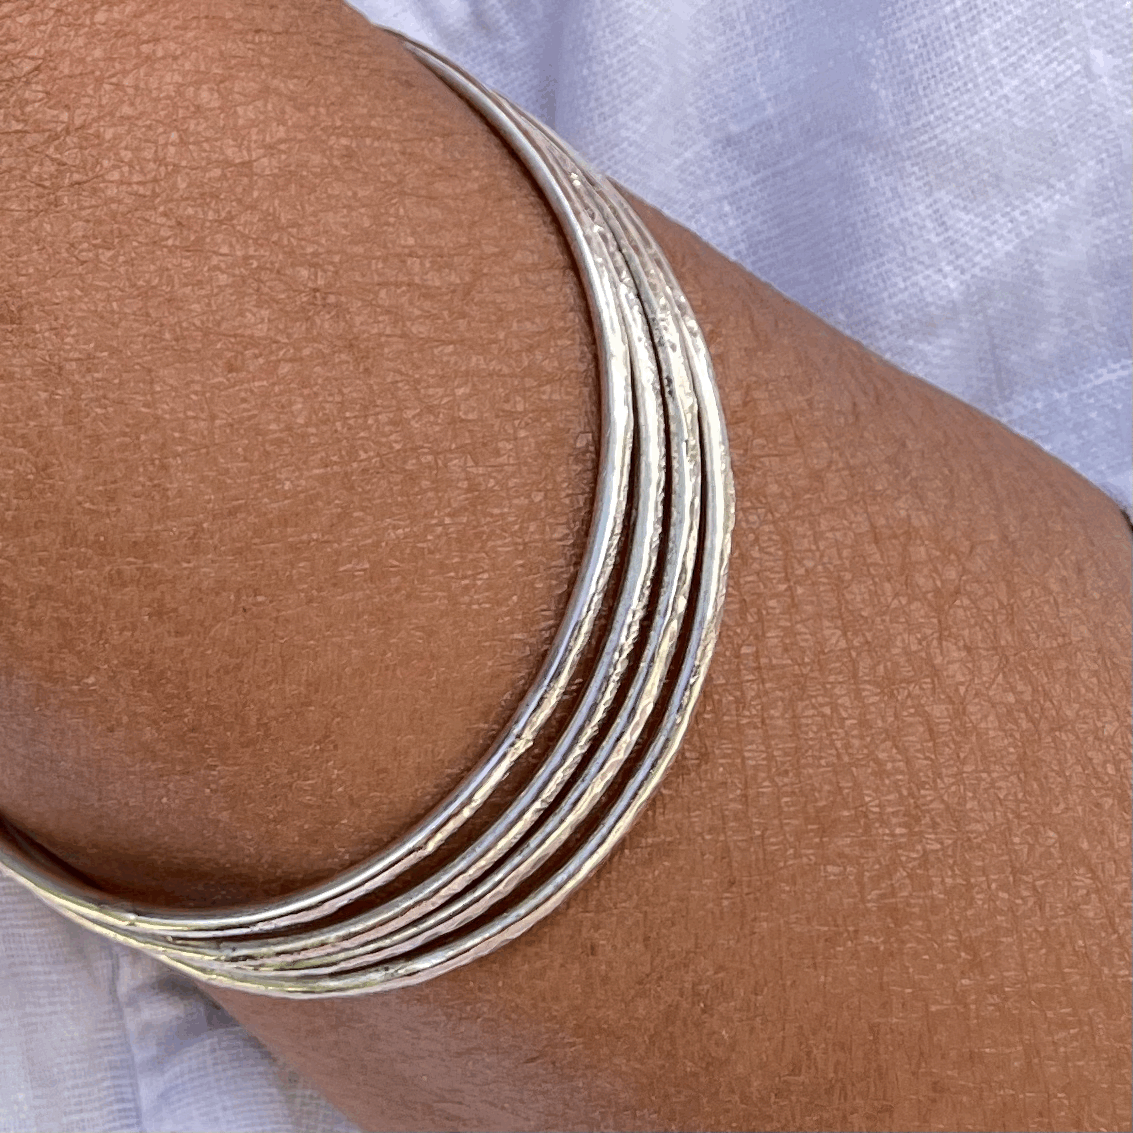 Textured Bangle: A handmade textured sturdy bangle in recycled silver, worn by a model.